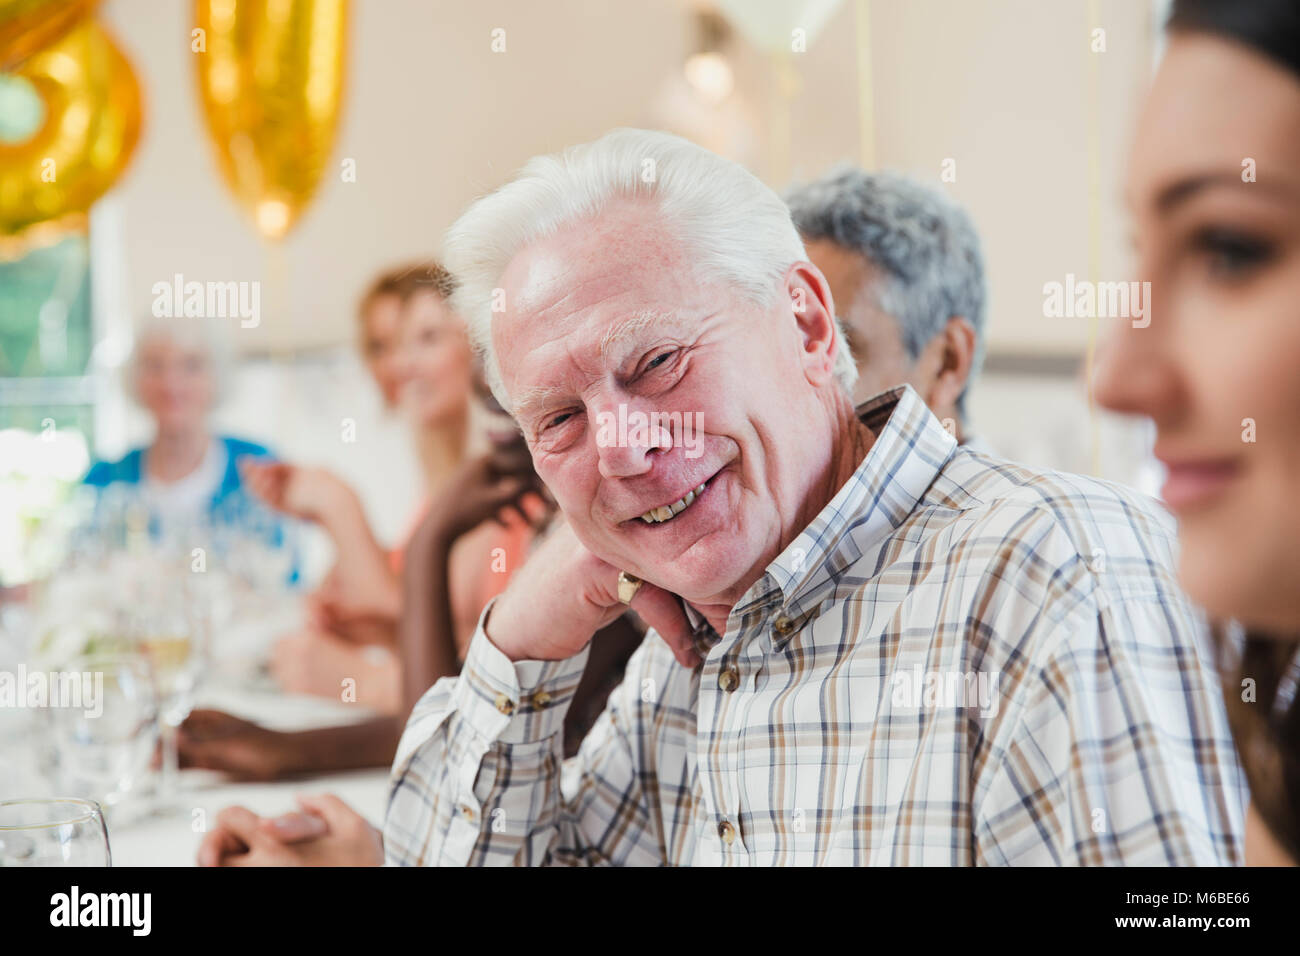 Happy senior man at a birthday party with his friends and family. He is sitting at the table smiling for the camera with his head resting on his hand. Stock Photo